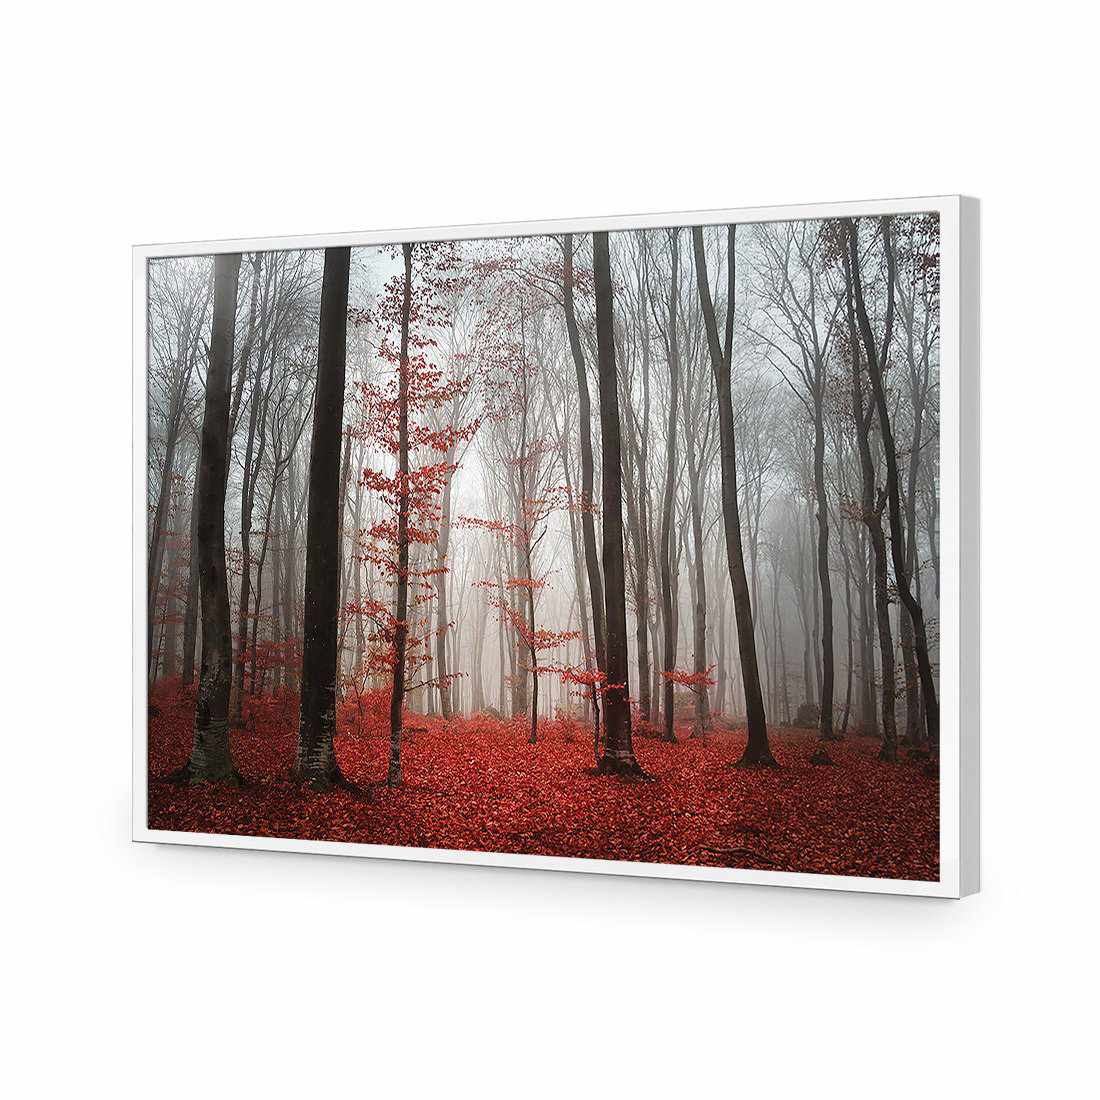 Scarlet Forest-Acrylic-Wall Art Design-Without Border-Acrylic - White Frame-45x30cm-Wall Art Designs